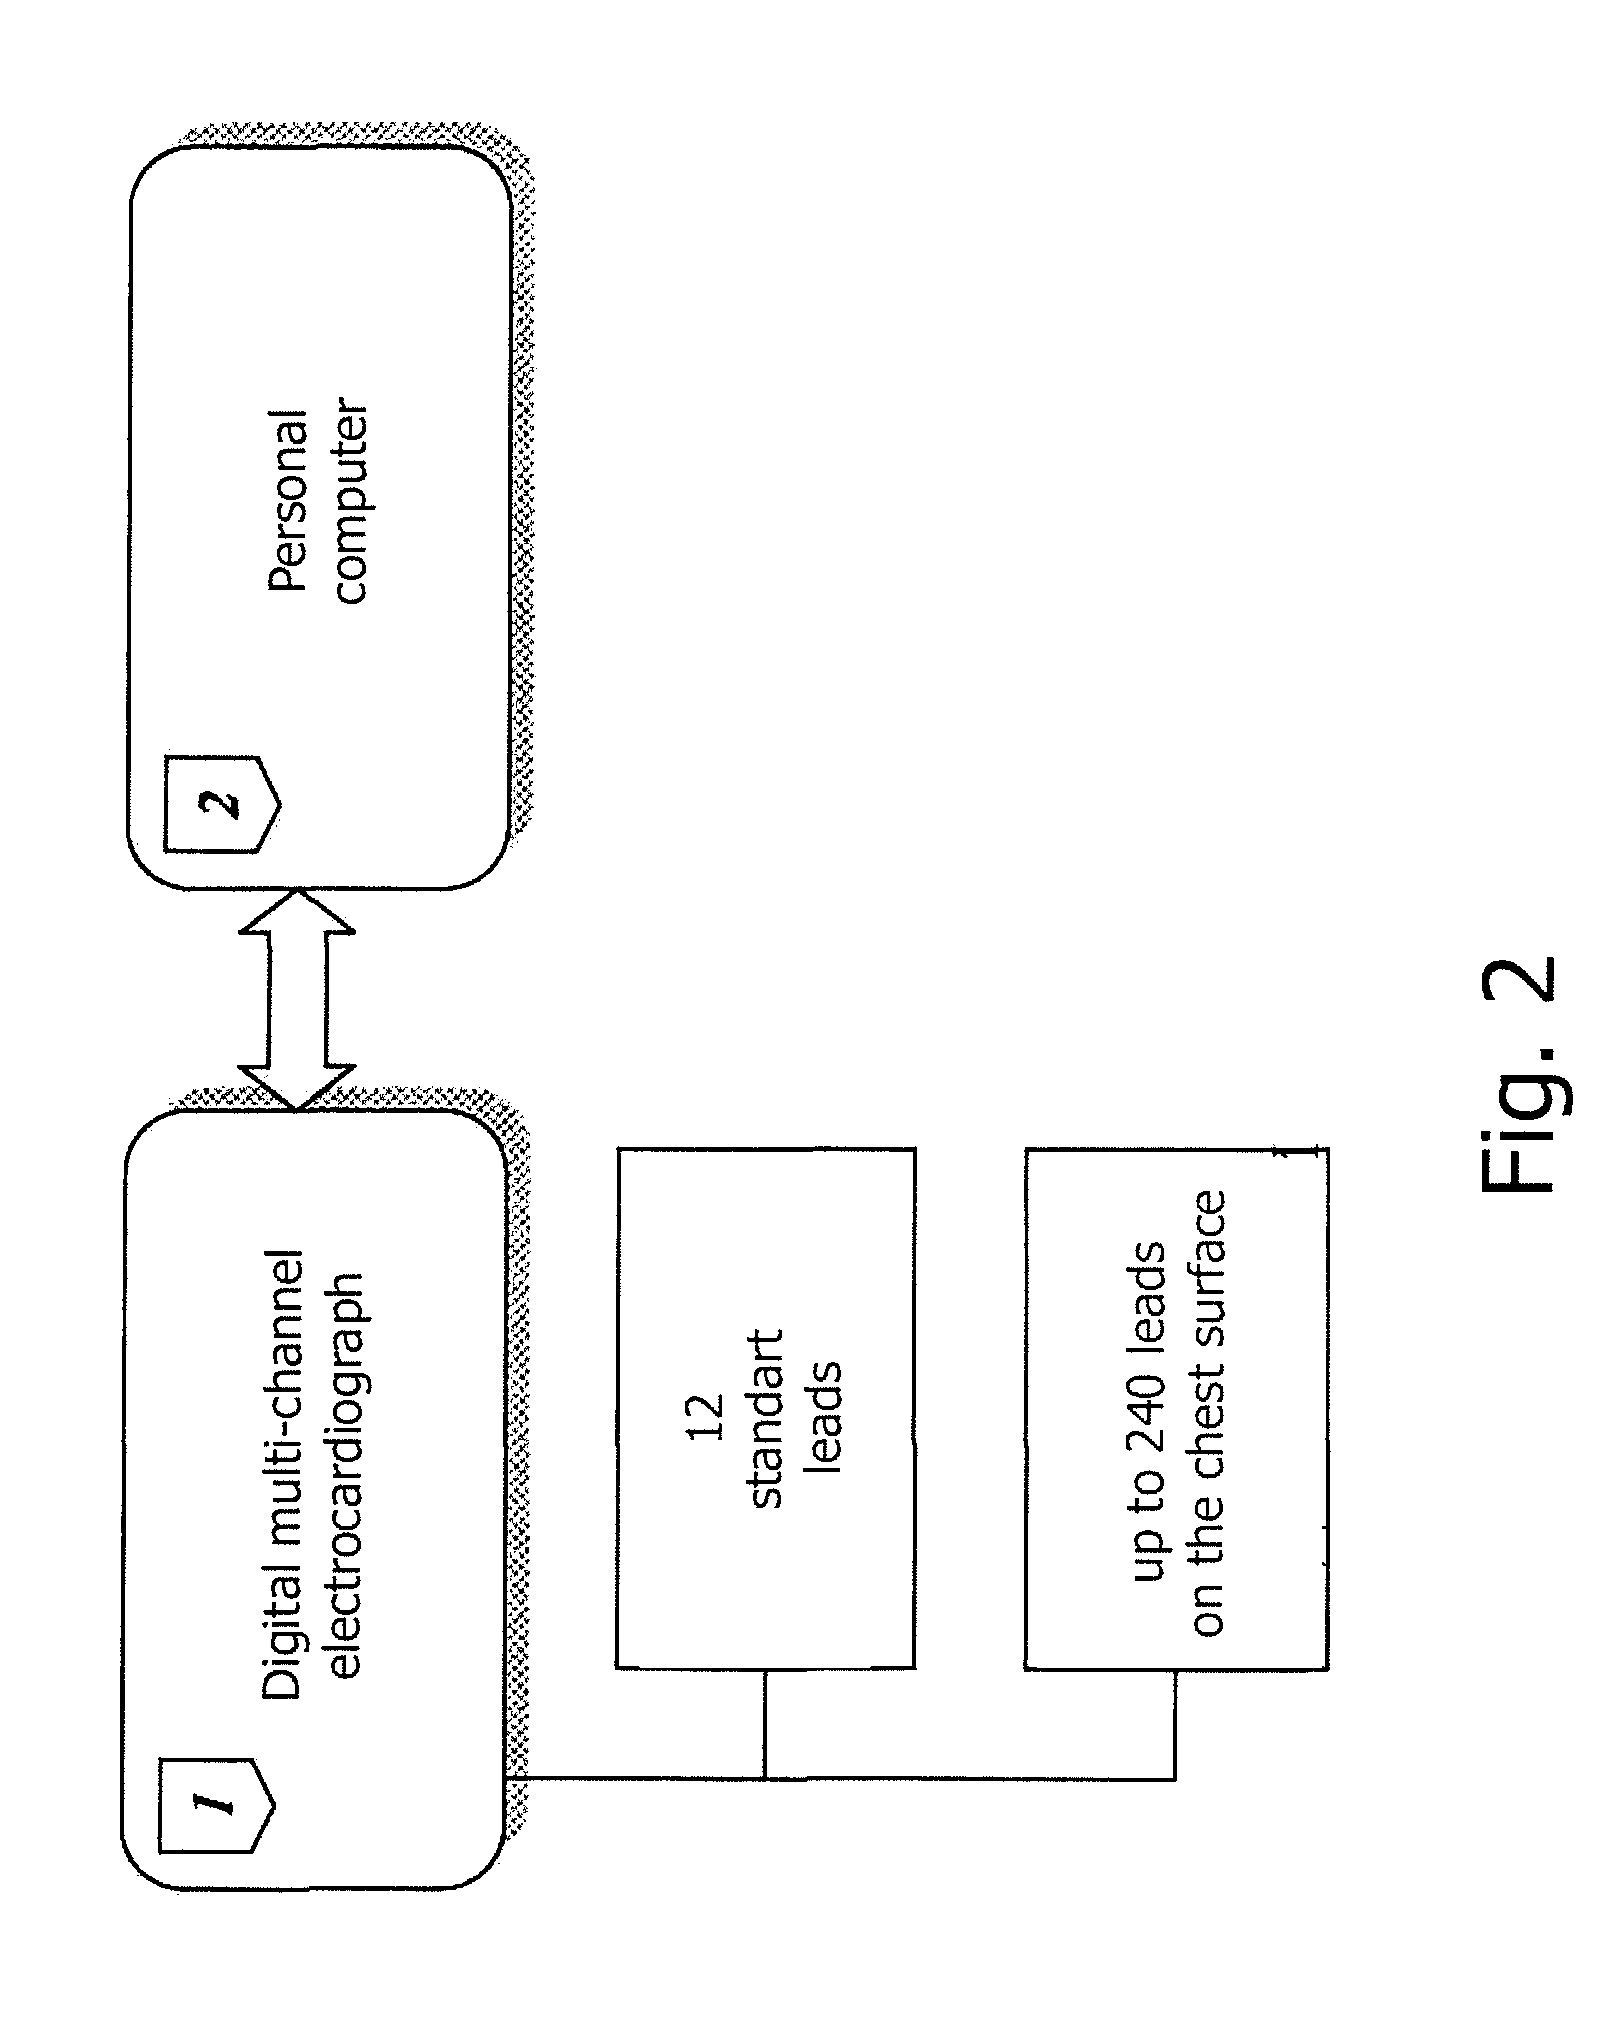 Method of noninvasive electrophysiological study of the heart